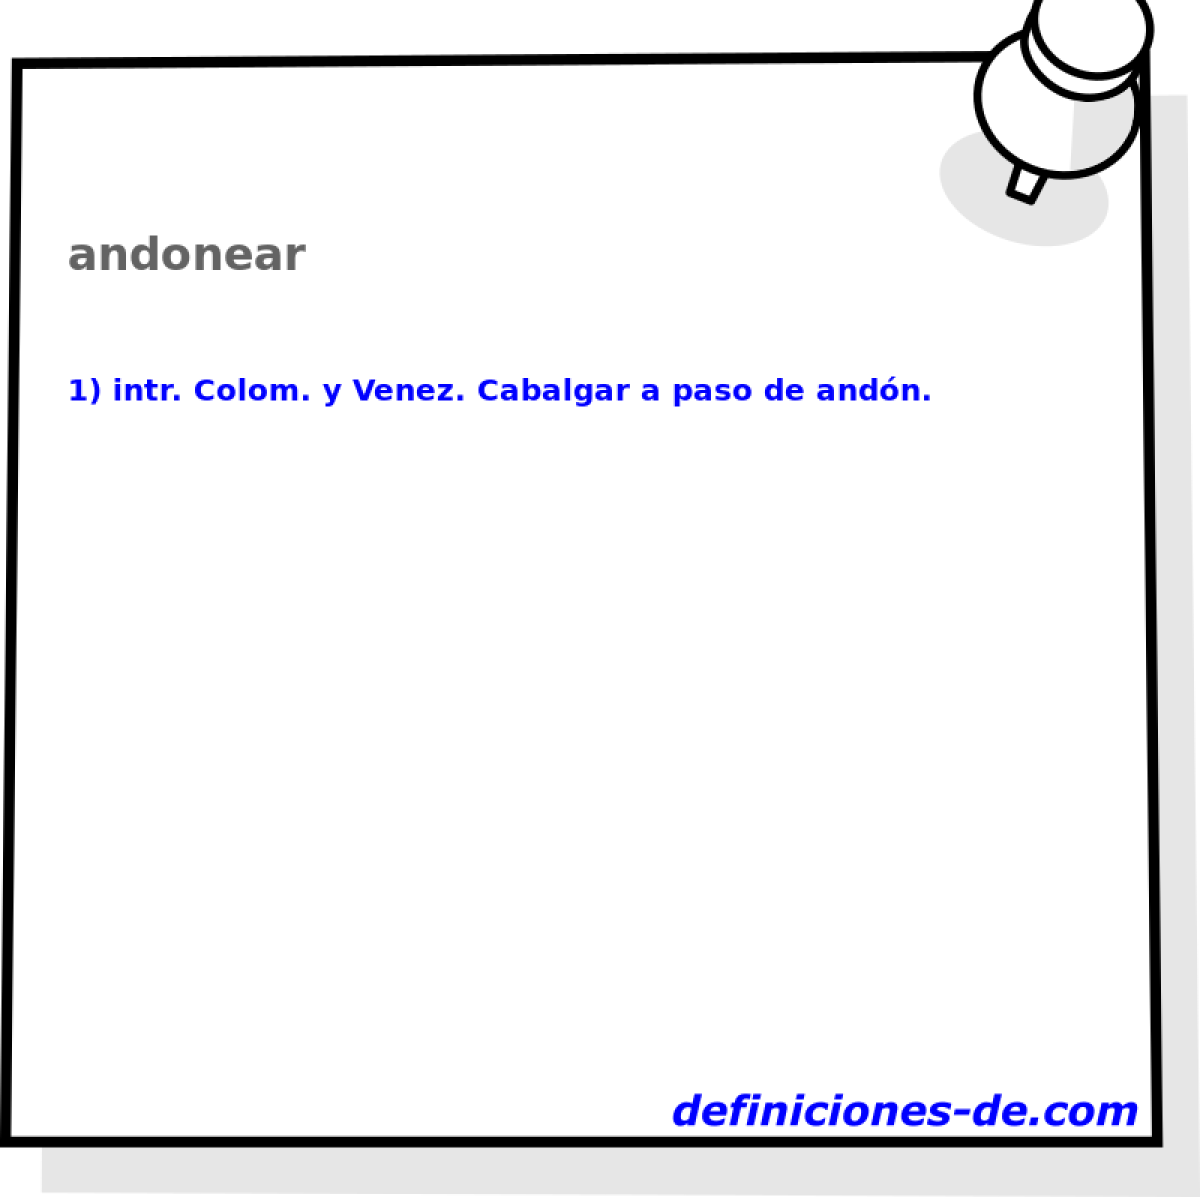 andonear 